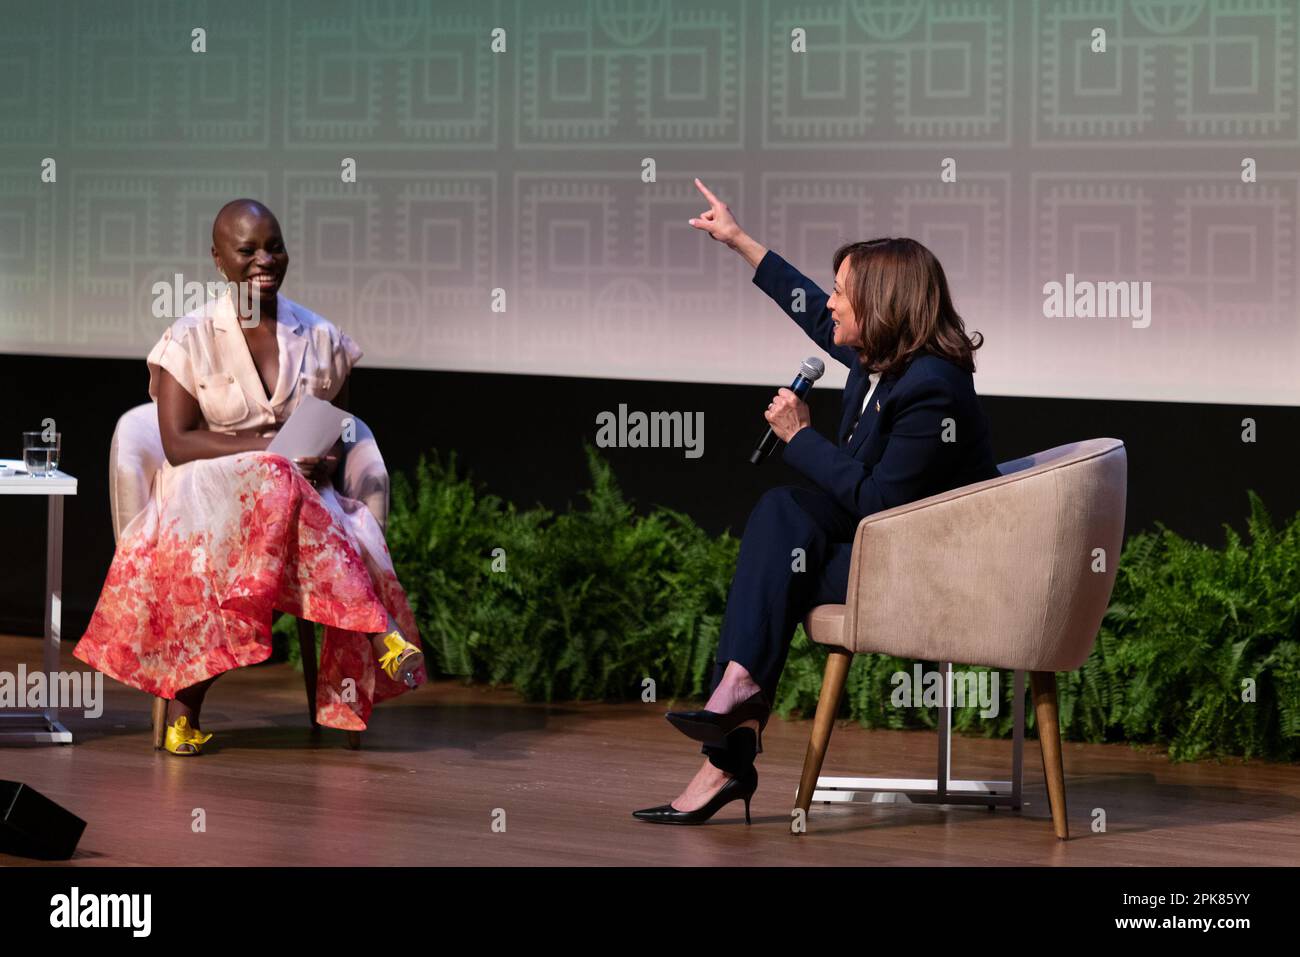 Jessica Nabongo, author and world traveler, Kevin Young, director of the National Museum of African American History and Culture (NMAAHC), have a conversation with US Vice President Kamala Harris during an event at the NMAAHC in Washington, DC, US, on Wednesday, April 5, 2023. Harris's recent trip to Africa, at turns eliciting deep reflection from the historic US vice president, offered a chance for her to reconnect with Black Americans whose support is crucial for her and President Biden's looming reelection bid. Photographer: Cheriss May/Pool/Sipa USA Stock Photo